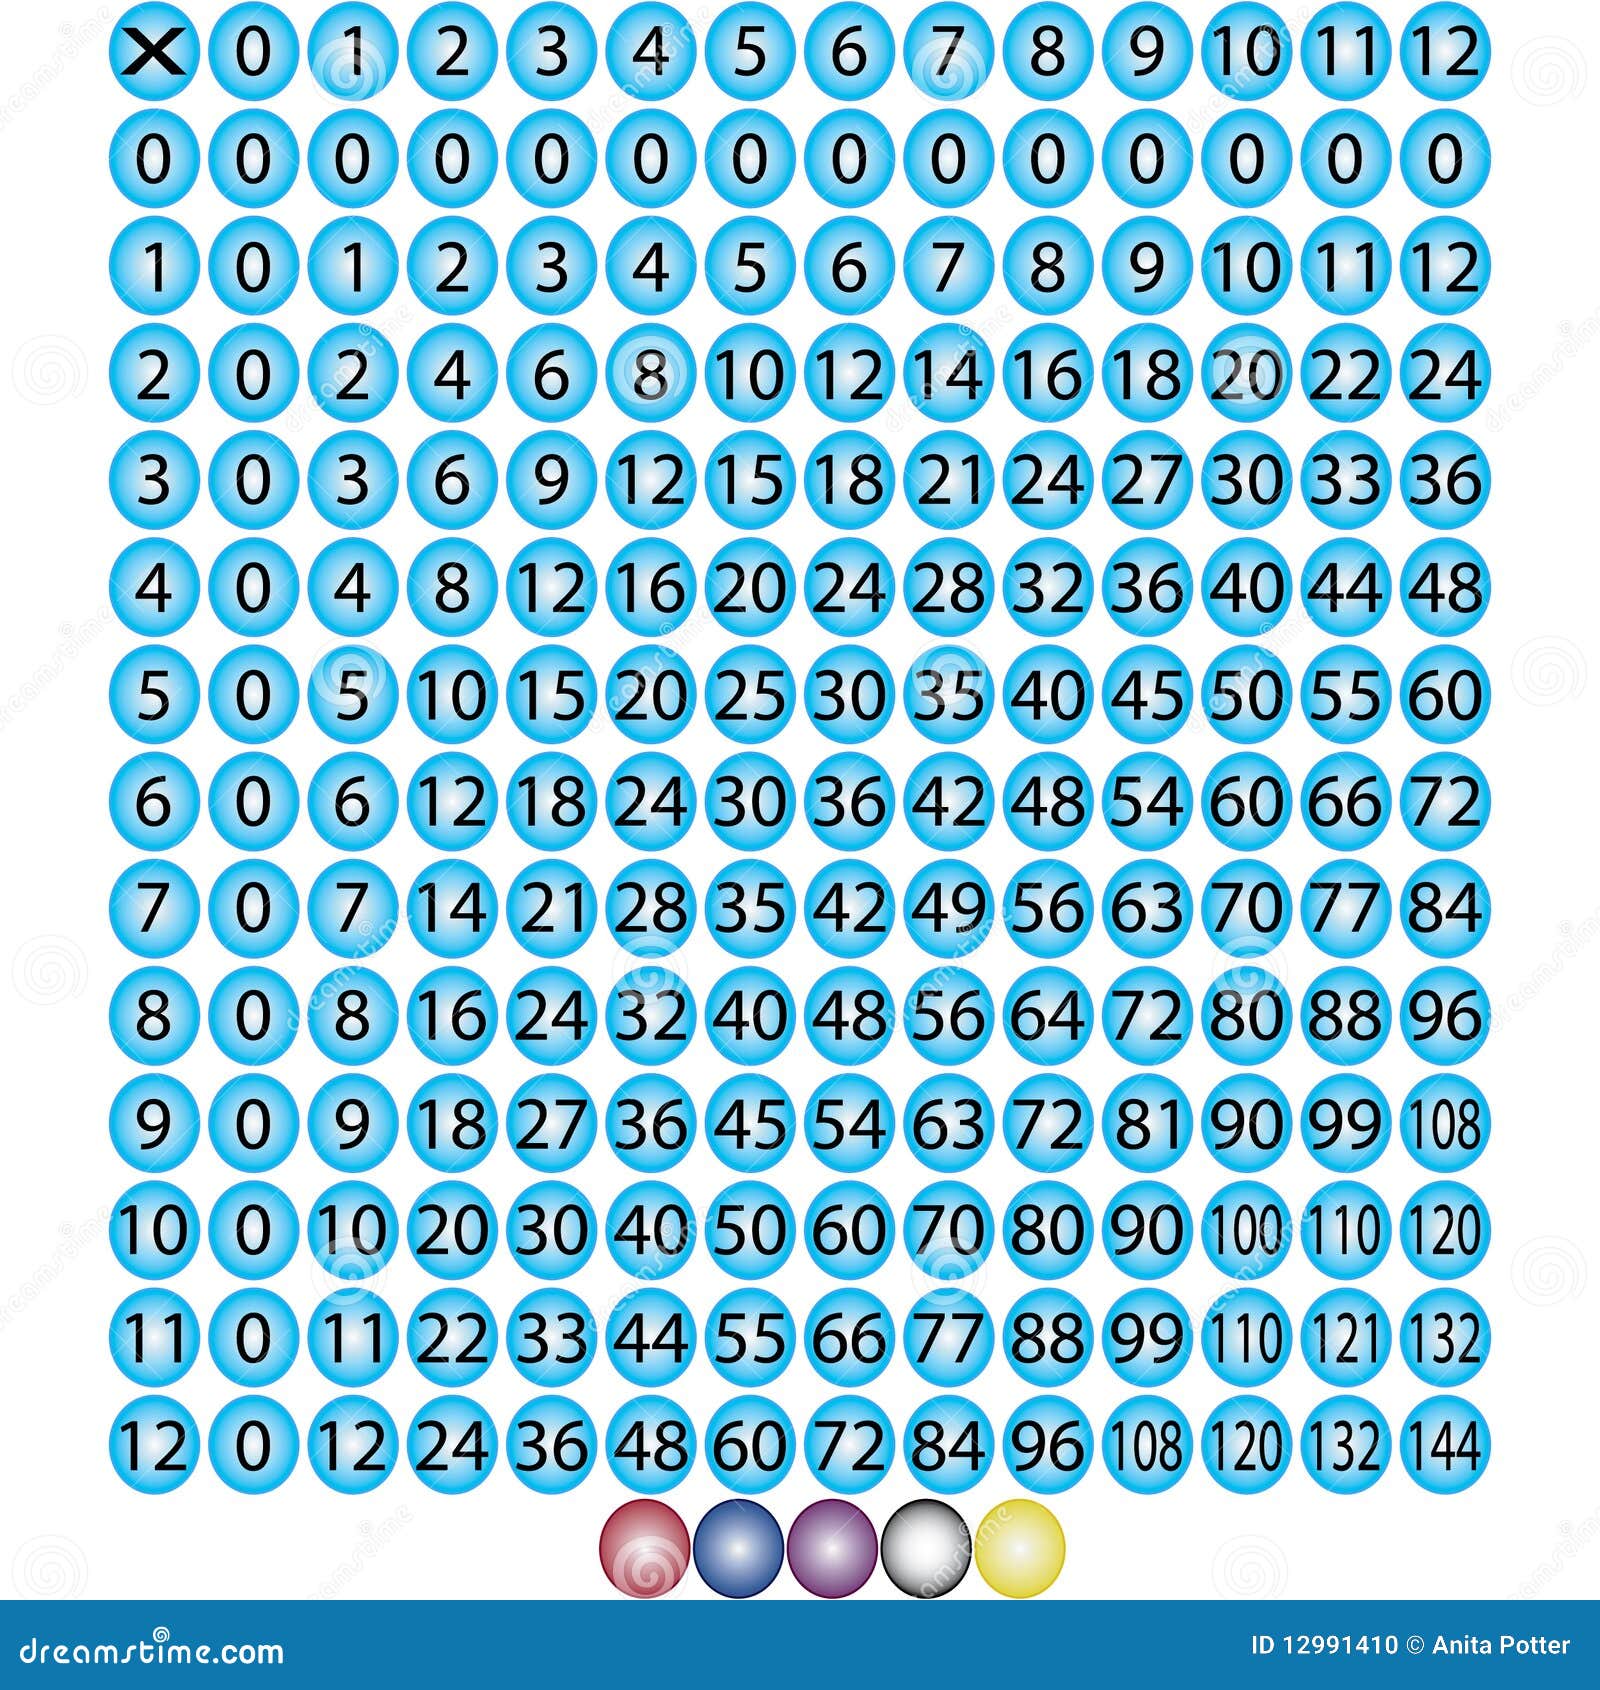 Multiplication Chart With 0